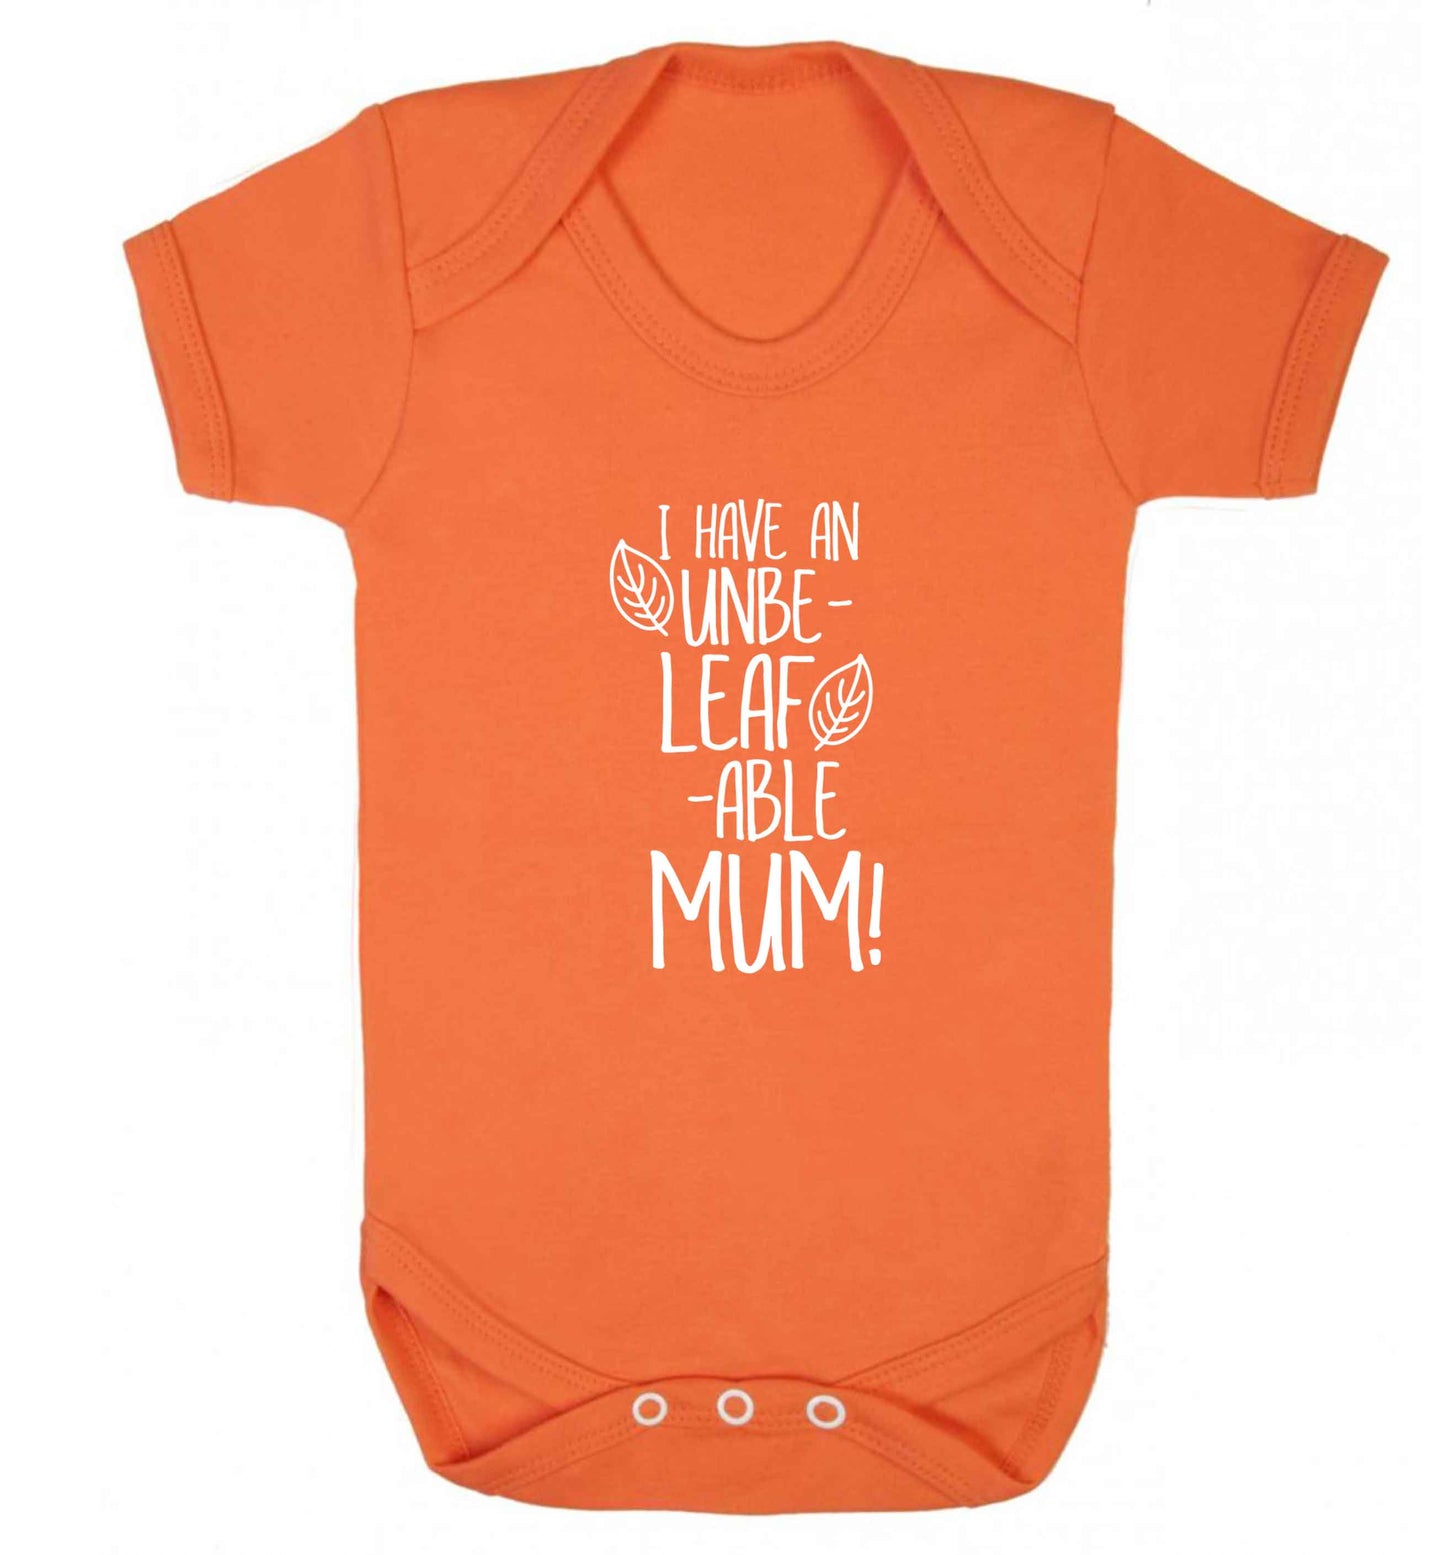 I have an unbeleafable mum! baby vest orange 18-24 months